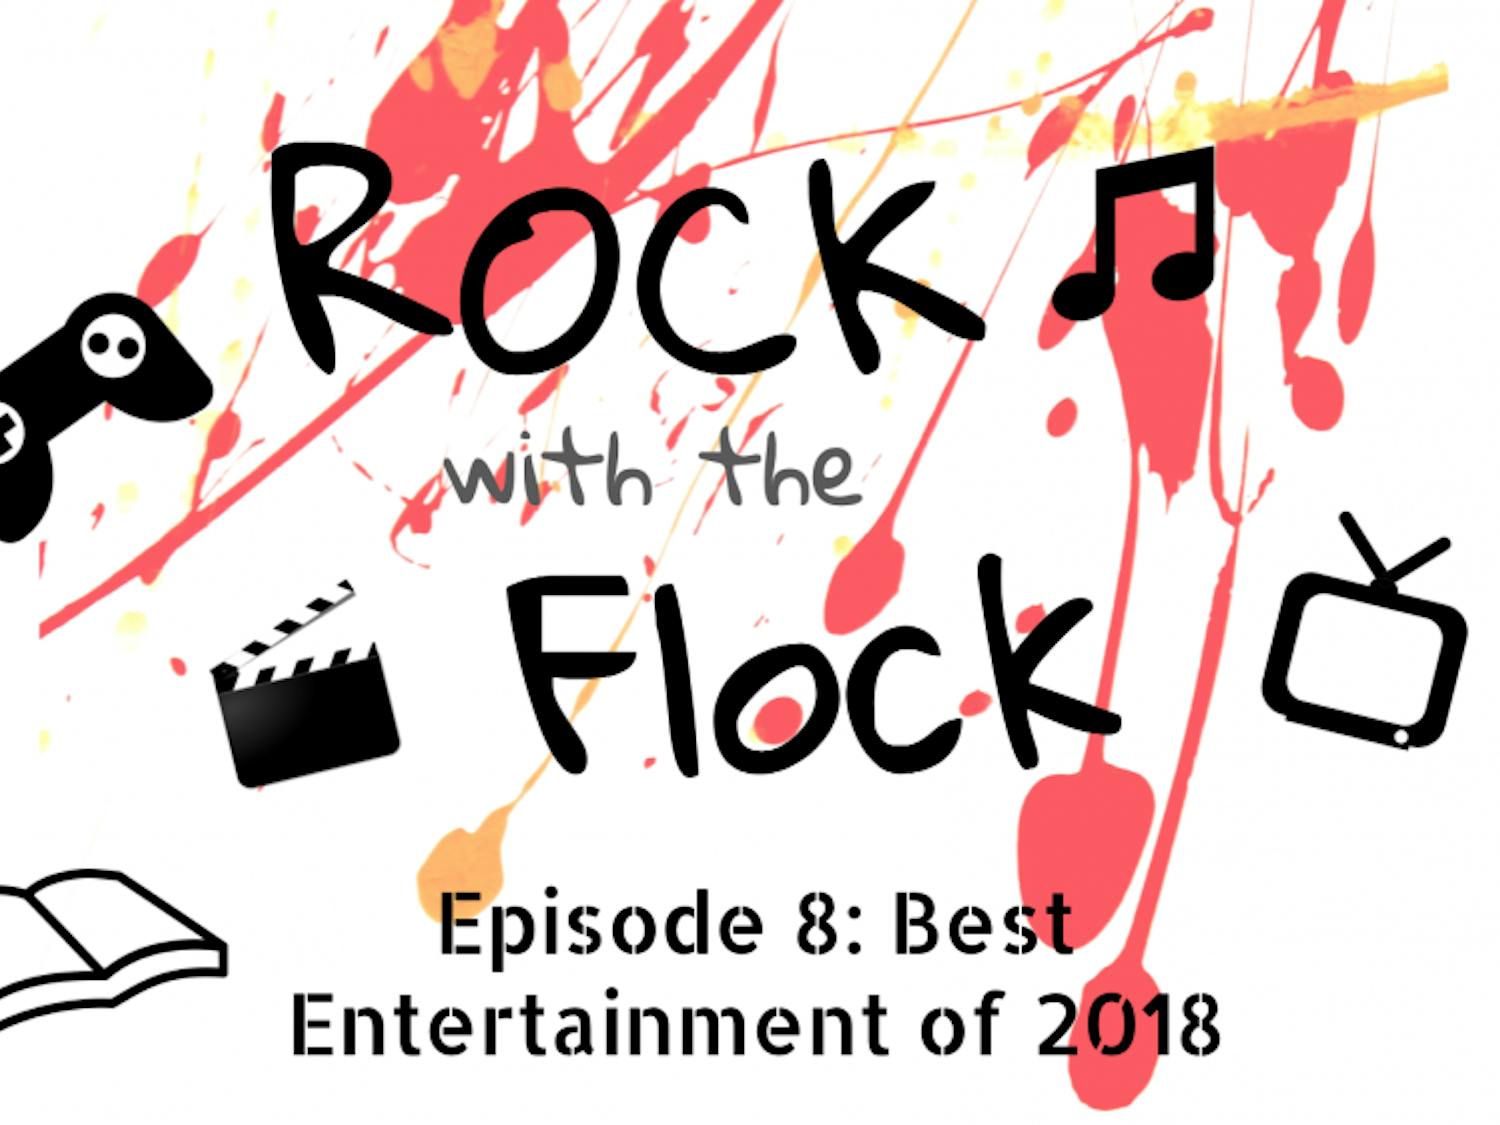 Thank you all for tuning in!&nbsp;Rock with the Flock will return next semester.